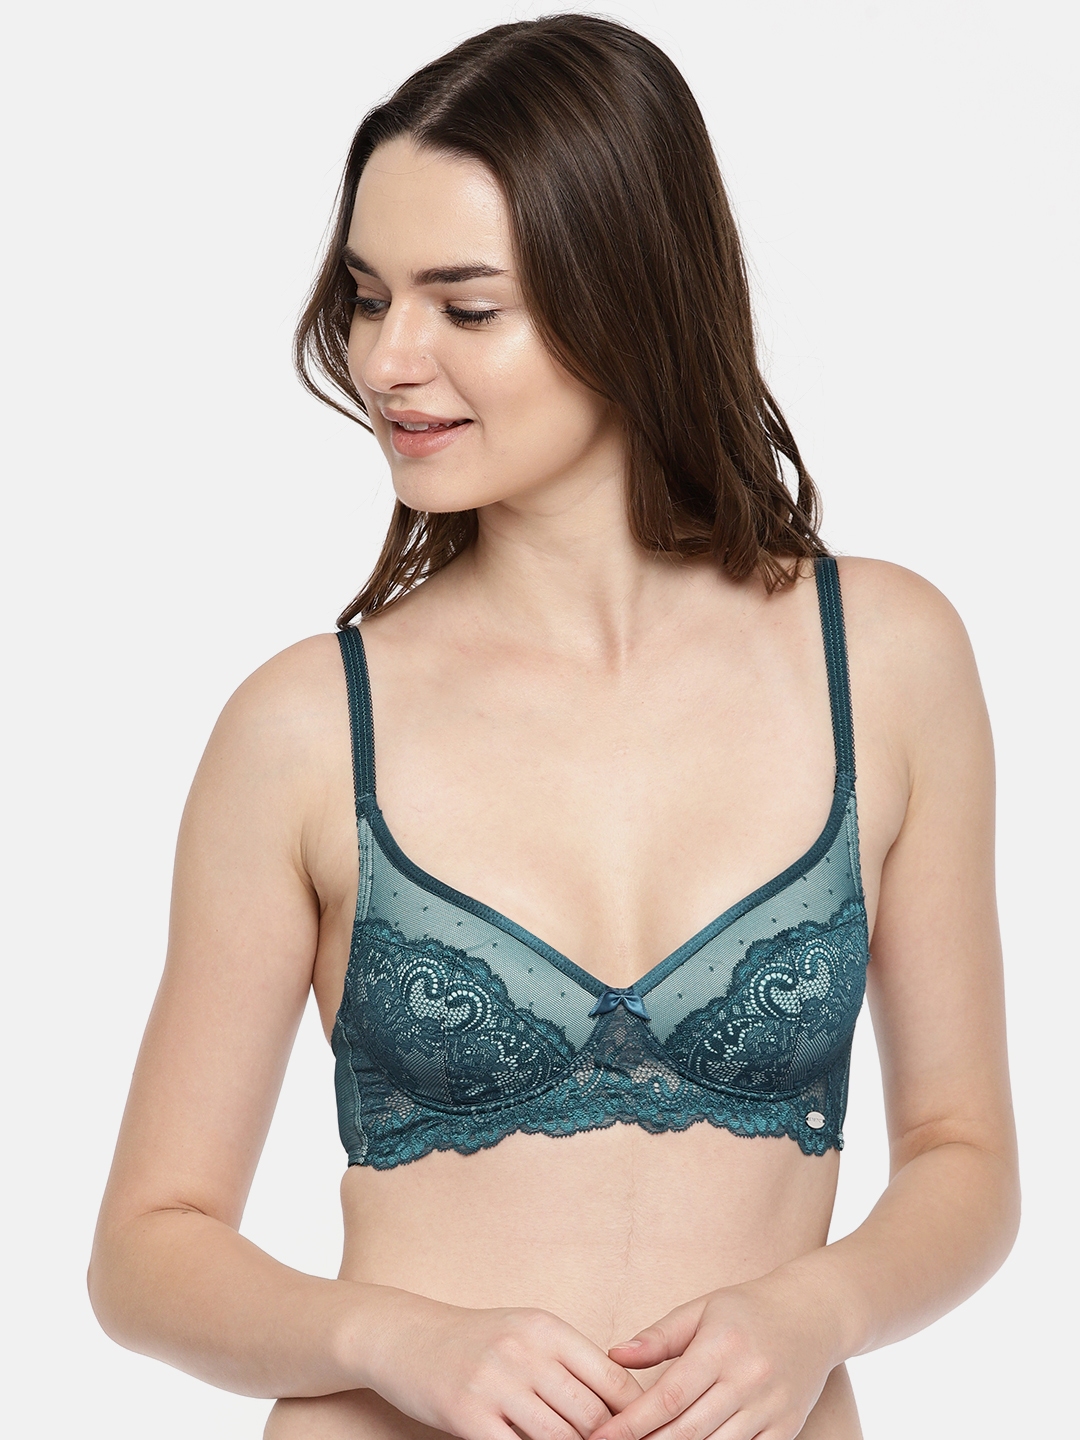 Buy Enamor Teal Blue Lace Lightly Padded Non Wired Medium Coverage Plunge T  Shirt Bra F089 - Bra for Women 7410462